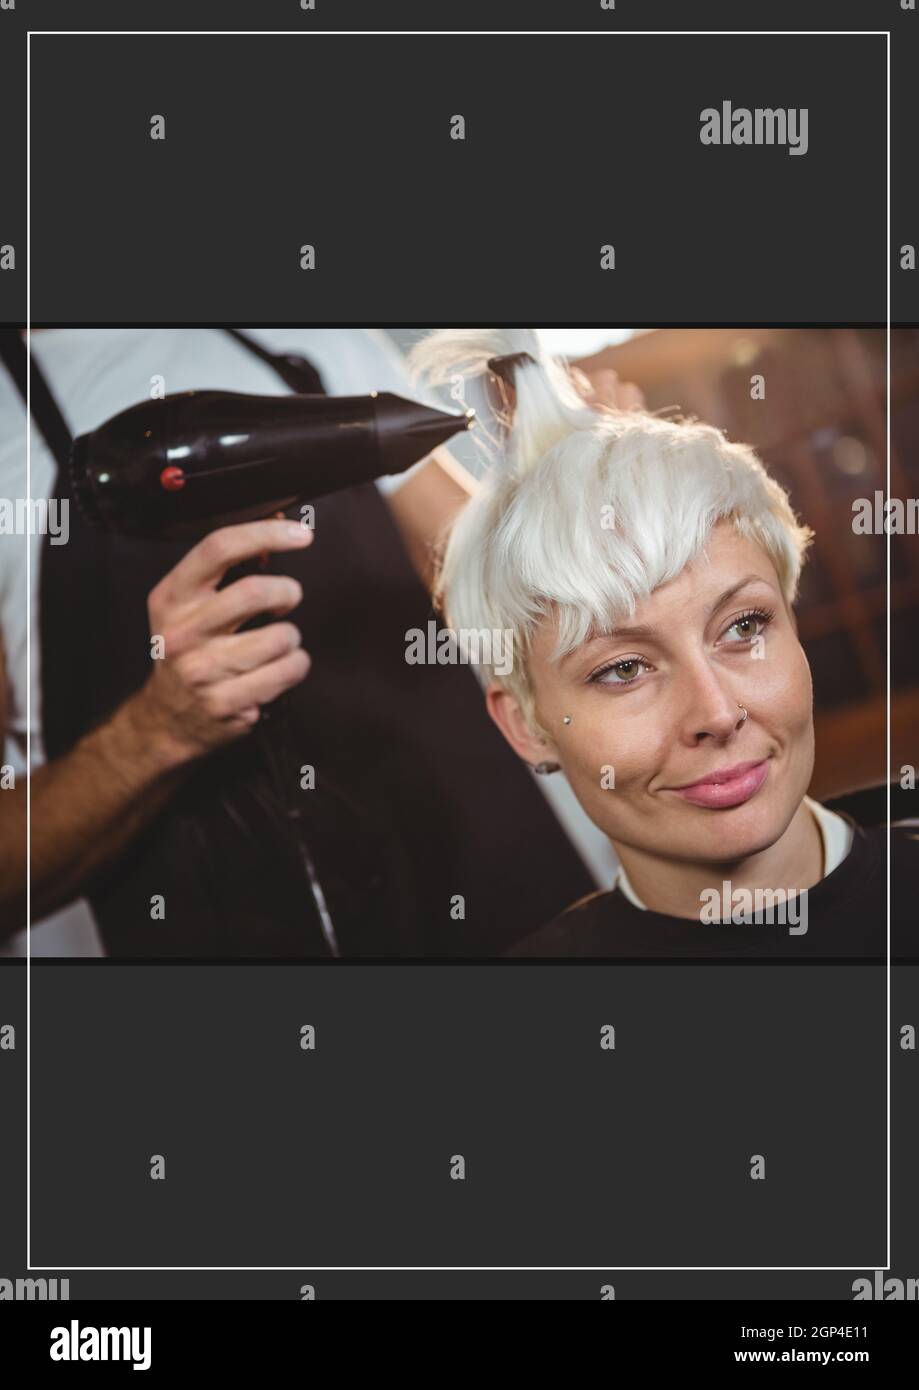 Composition of caucasian woman in hair salon Stock Photo